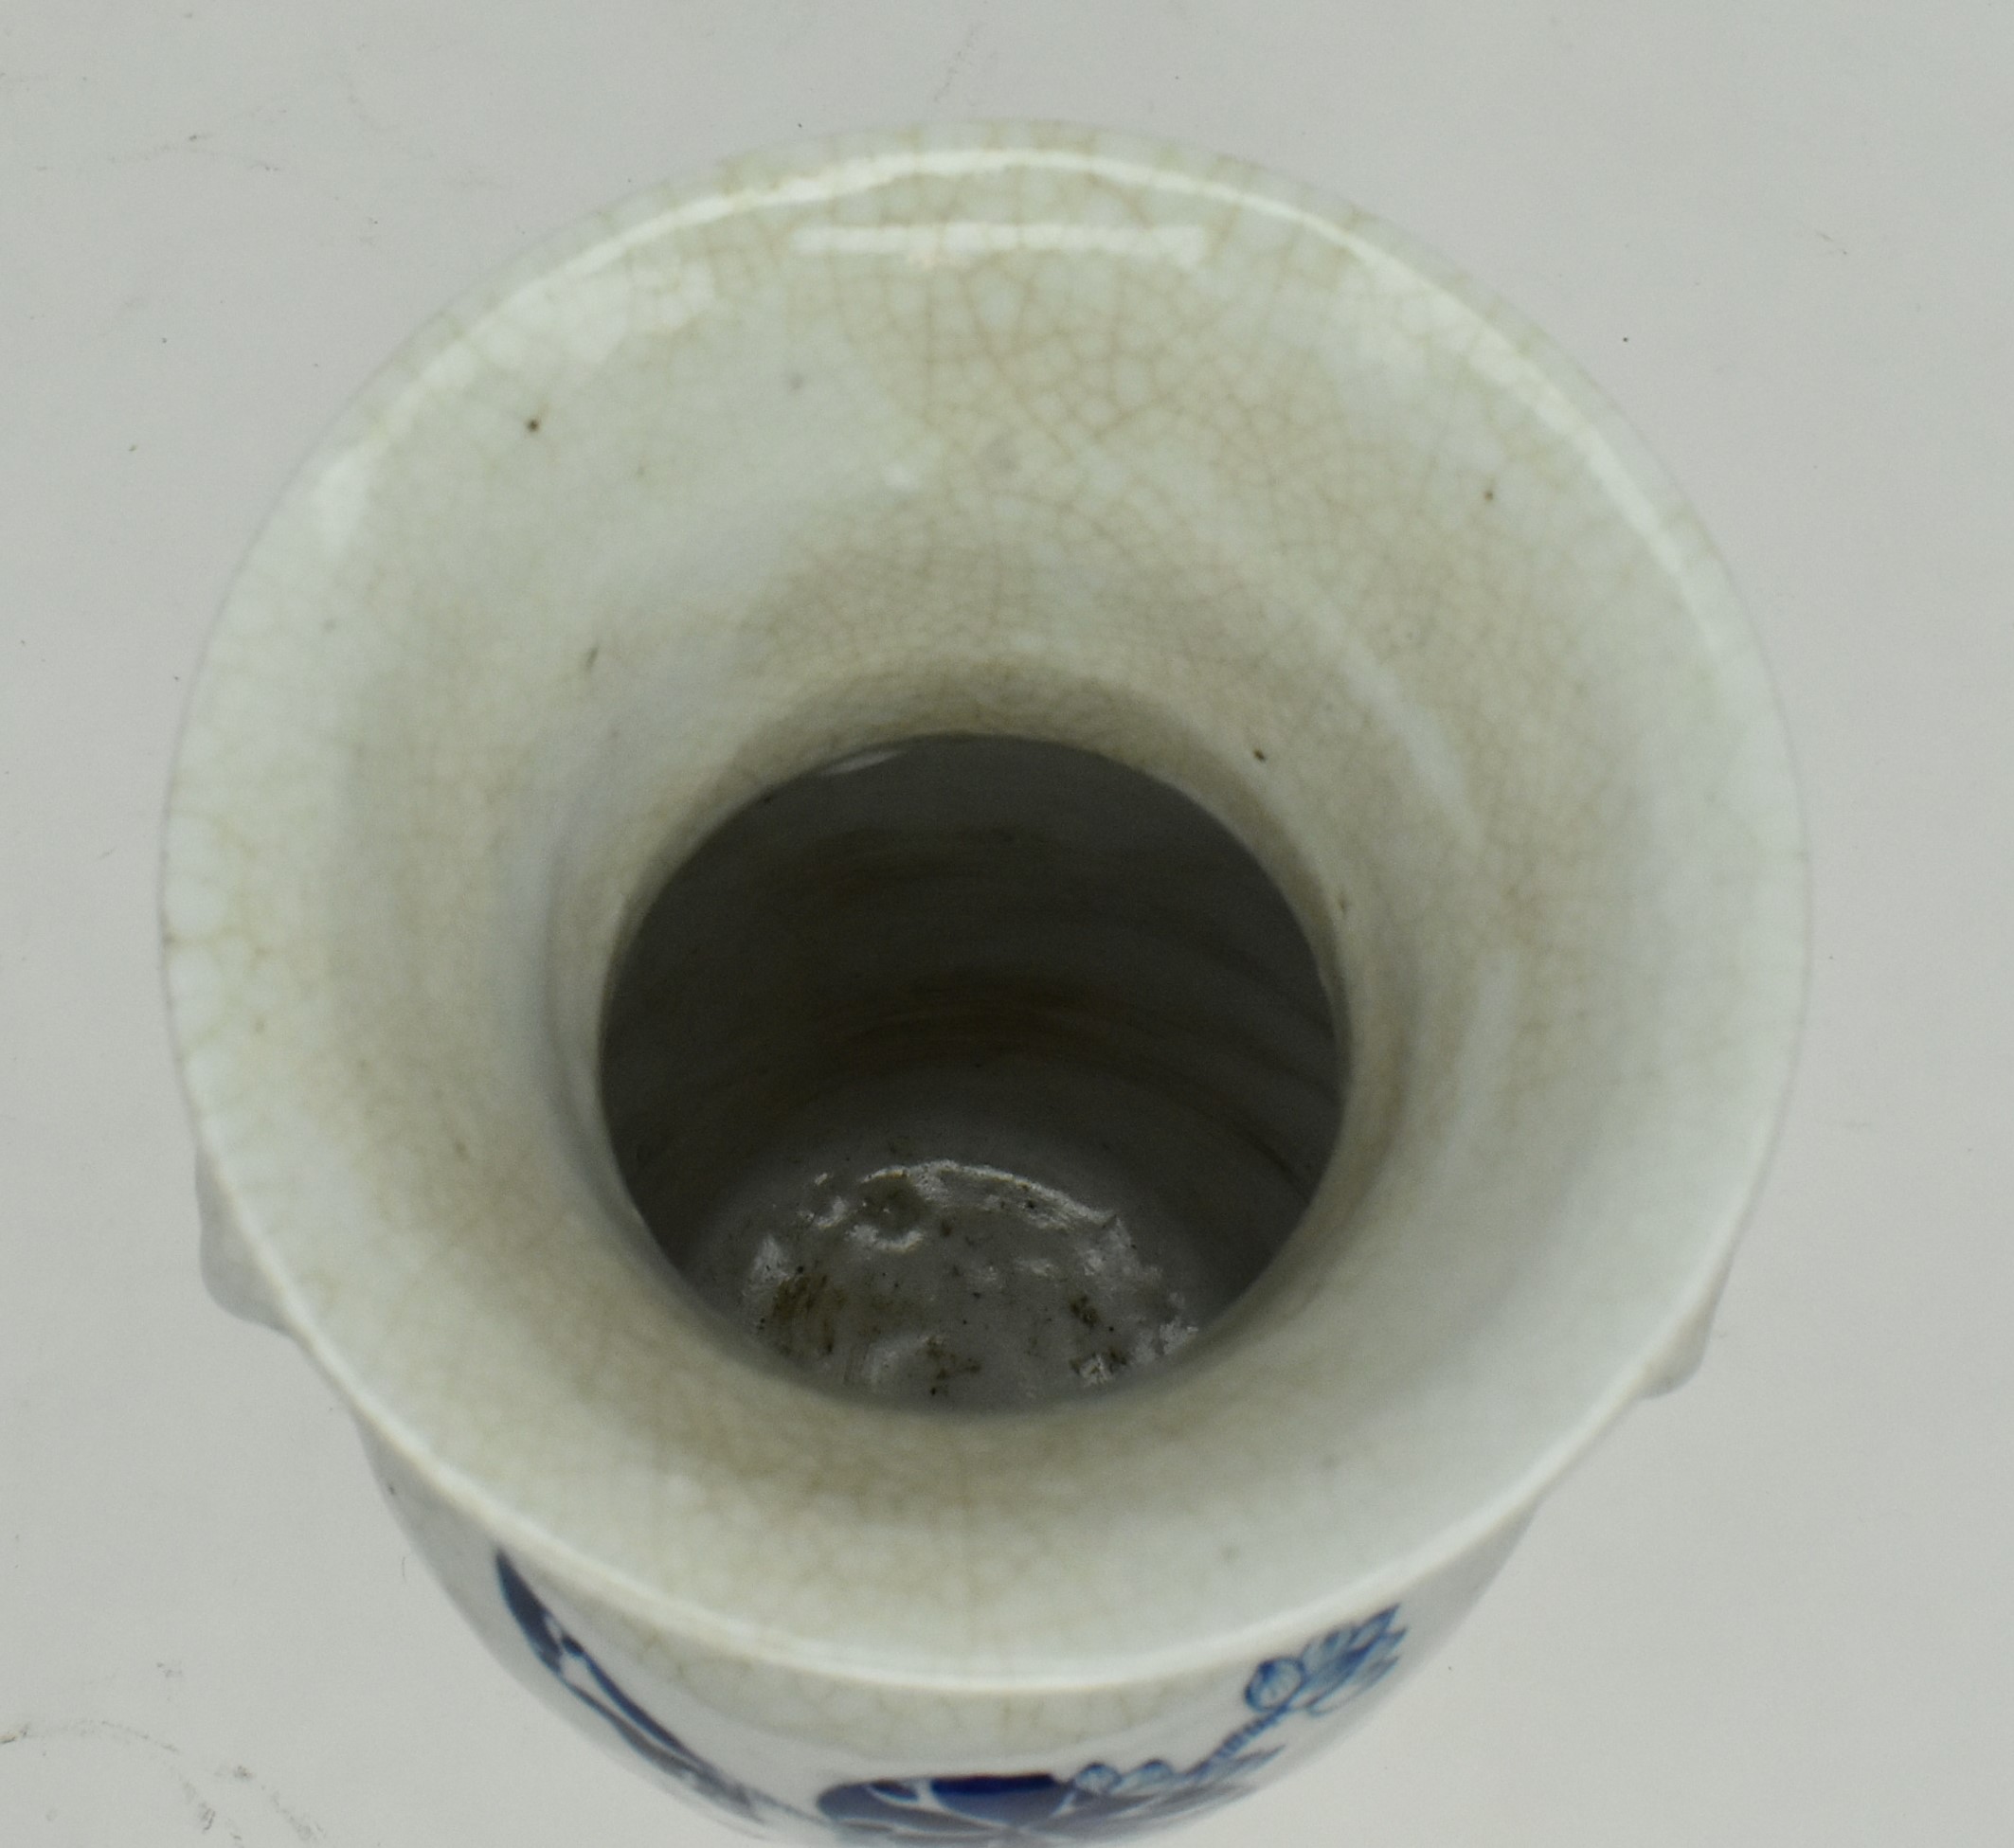 SWATOW WARE CRACKLED BLUE AND WHITE VASE 漳州窑青花博古花瓶 - Image 5 of 6